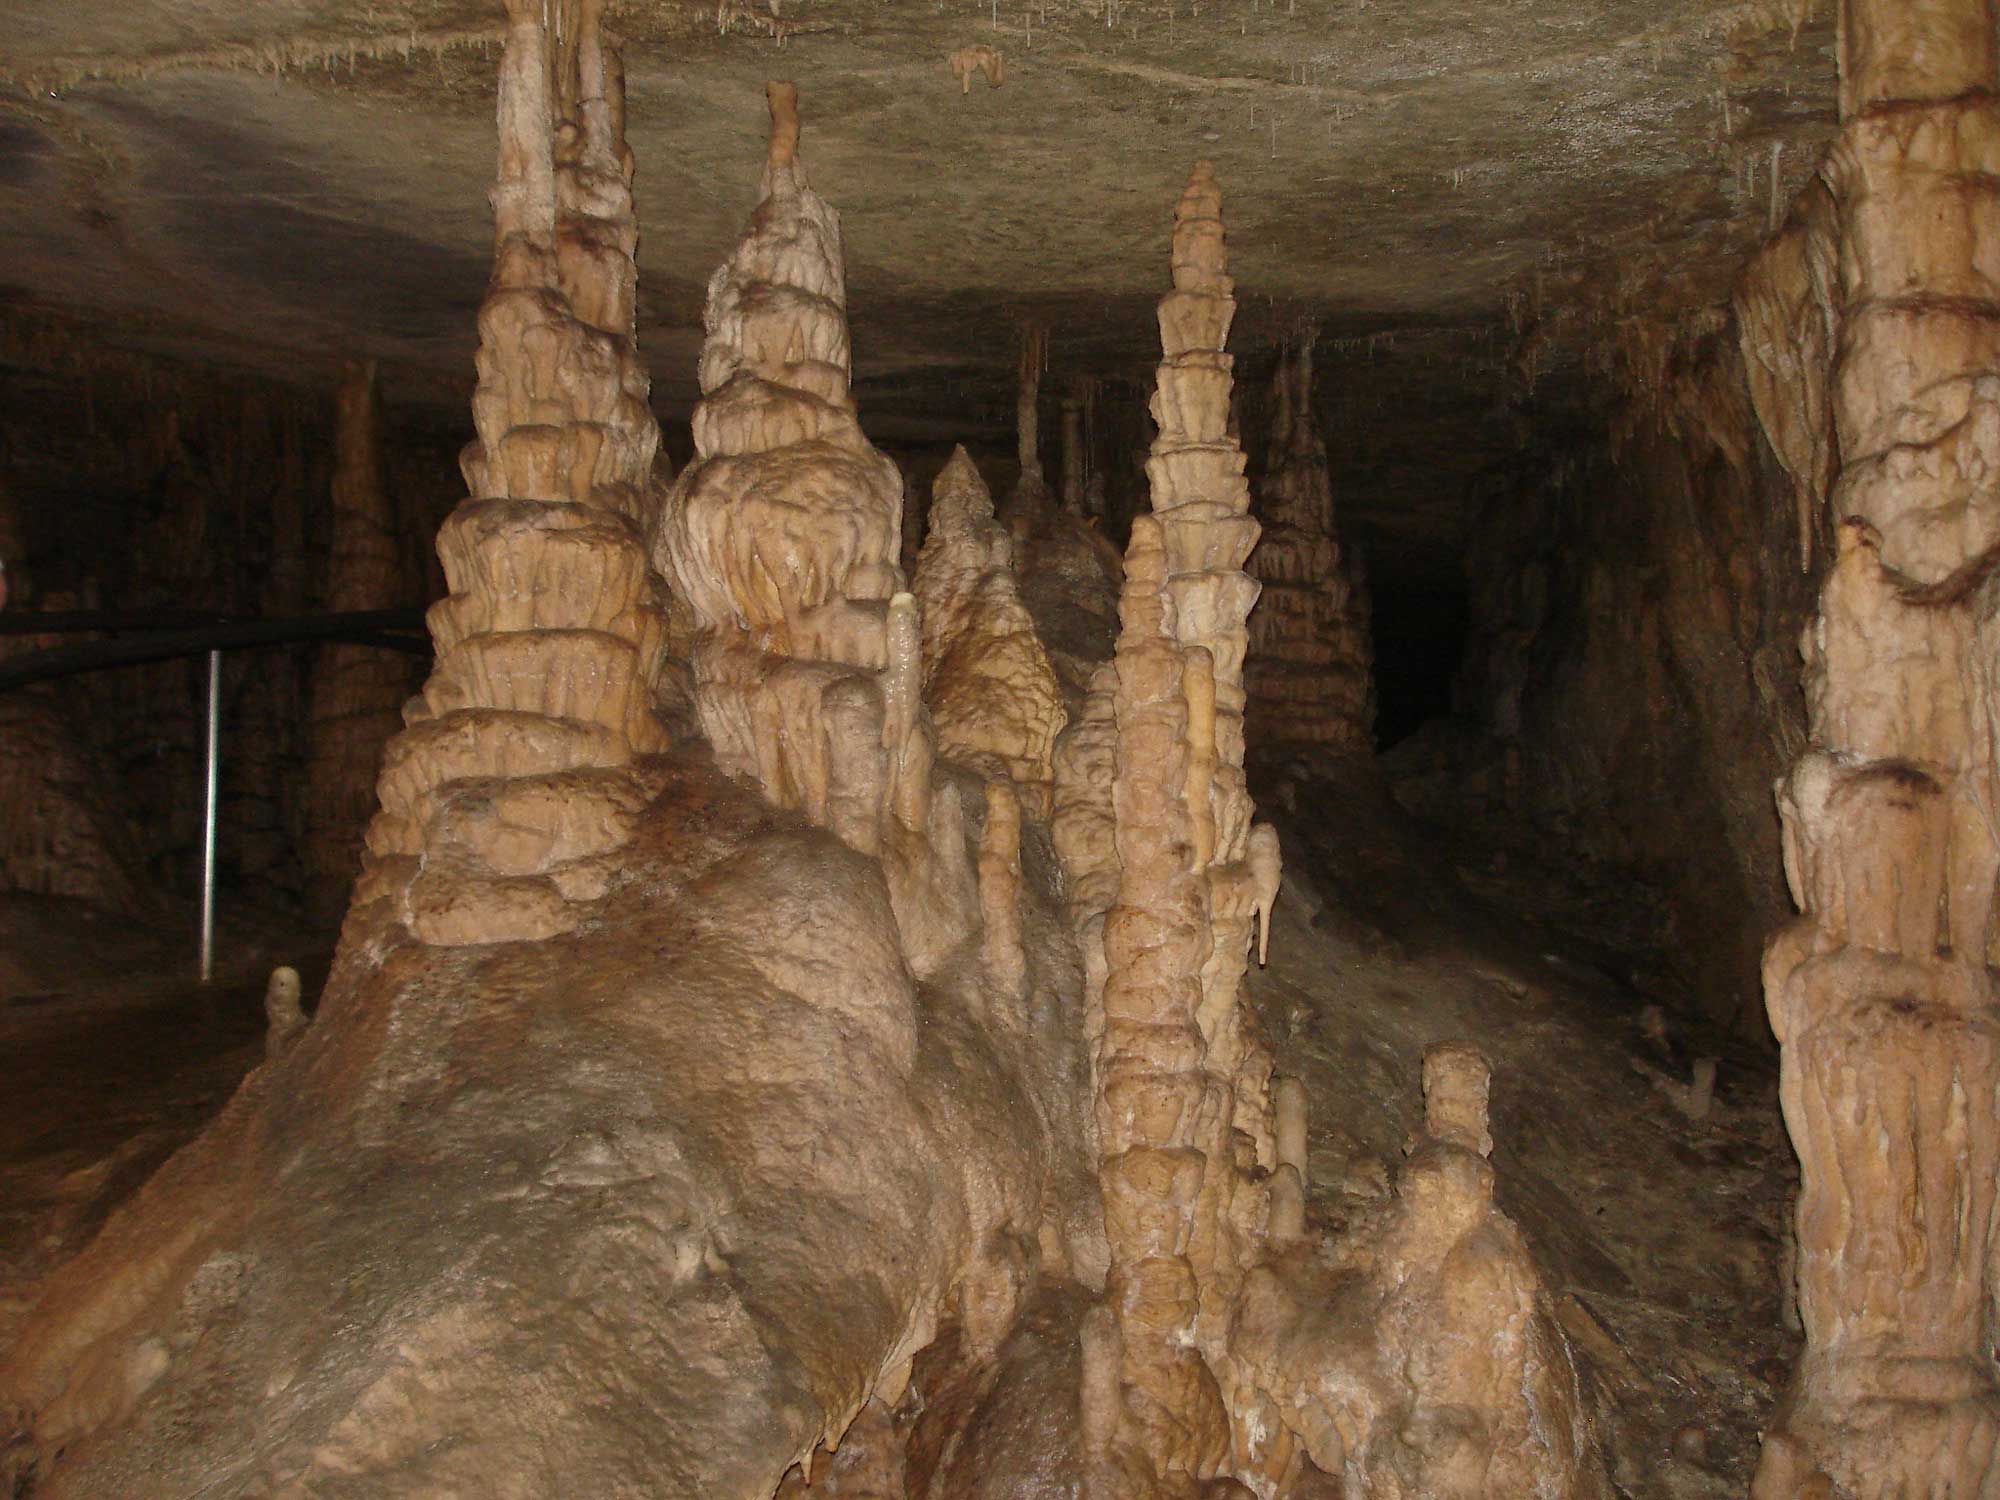 Photograph of stalagmites forming in a cave at Mammoth Cave National Park, Kentucky.